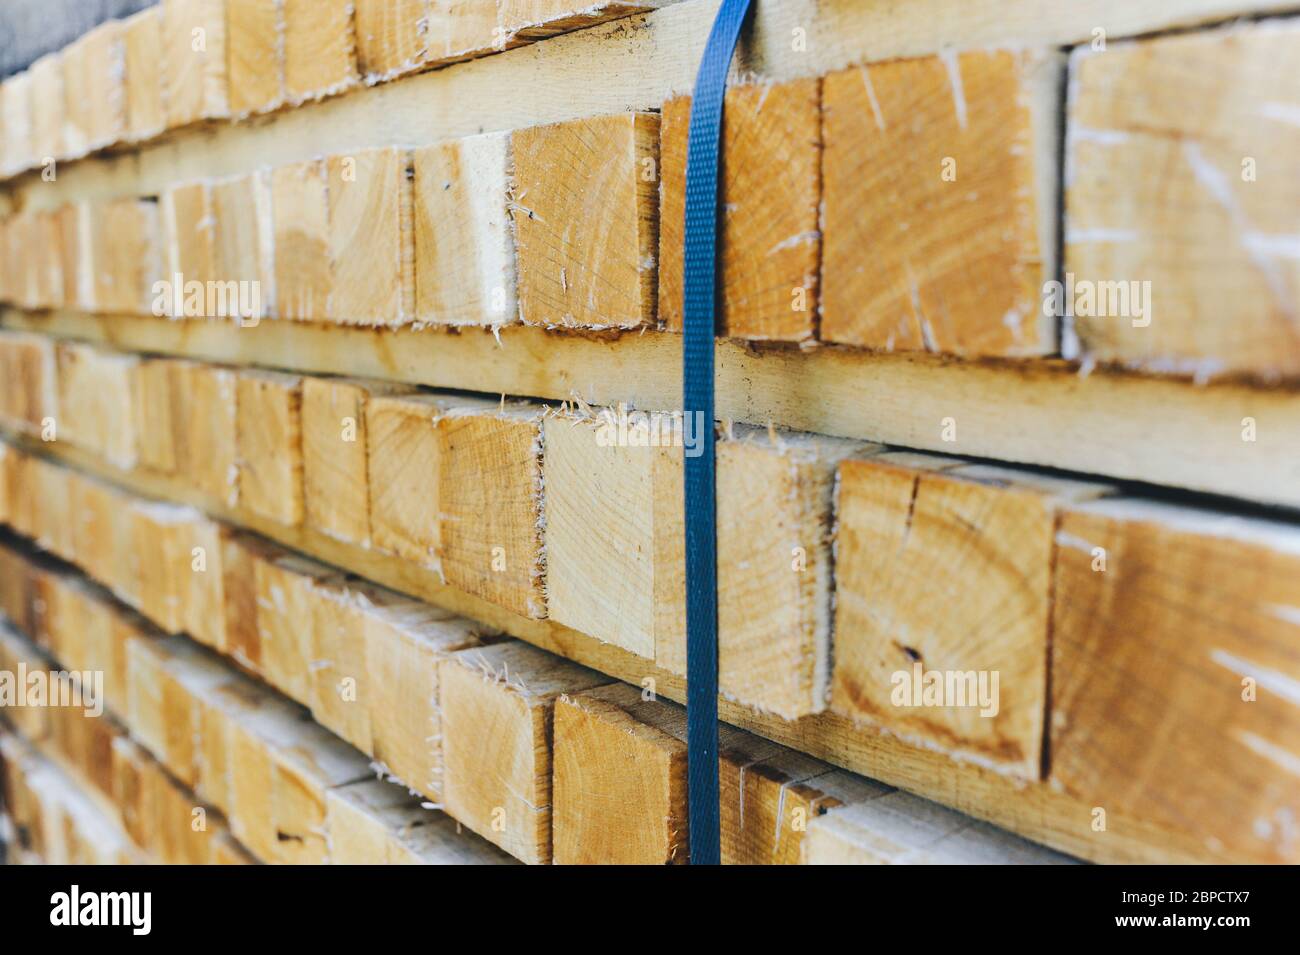 Stack of wooden bars. Square ends of the wooden bars. Wood timber construction material for background and texture. close up. Stock Photo